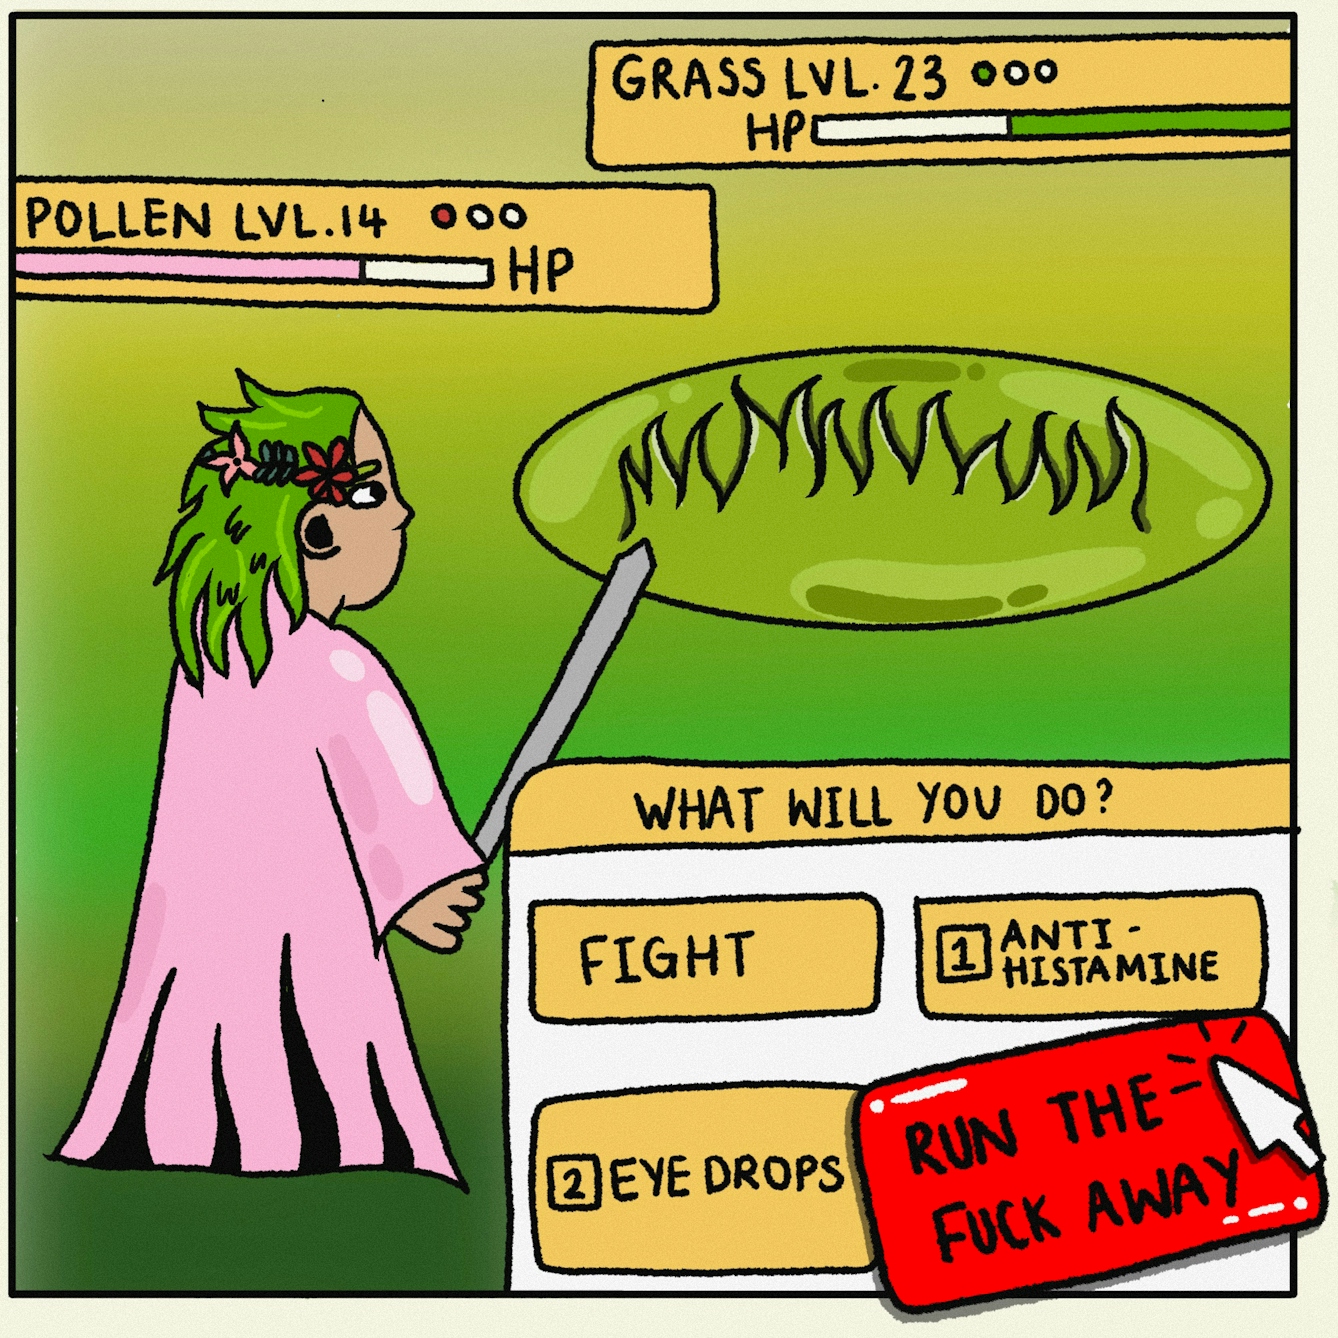 Panel 4 of a digitally drawn, four-panel comic titled ‘Nope’. The character has a sword in their hand and is challenged with a fight with the grass. The stats show the pollen levels are high. A box asks, ‘WHAT WILL YOU DO?'. You have the choice to fight, use your anti-histamine and eye drops, or - in a much bigger, red box - to ‘RUN THE FUCK AWAY’. A cartoon cursor shows you choose to run. 